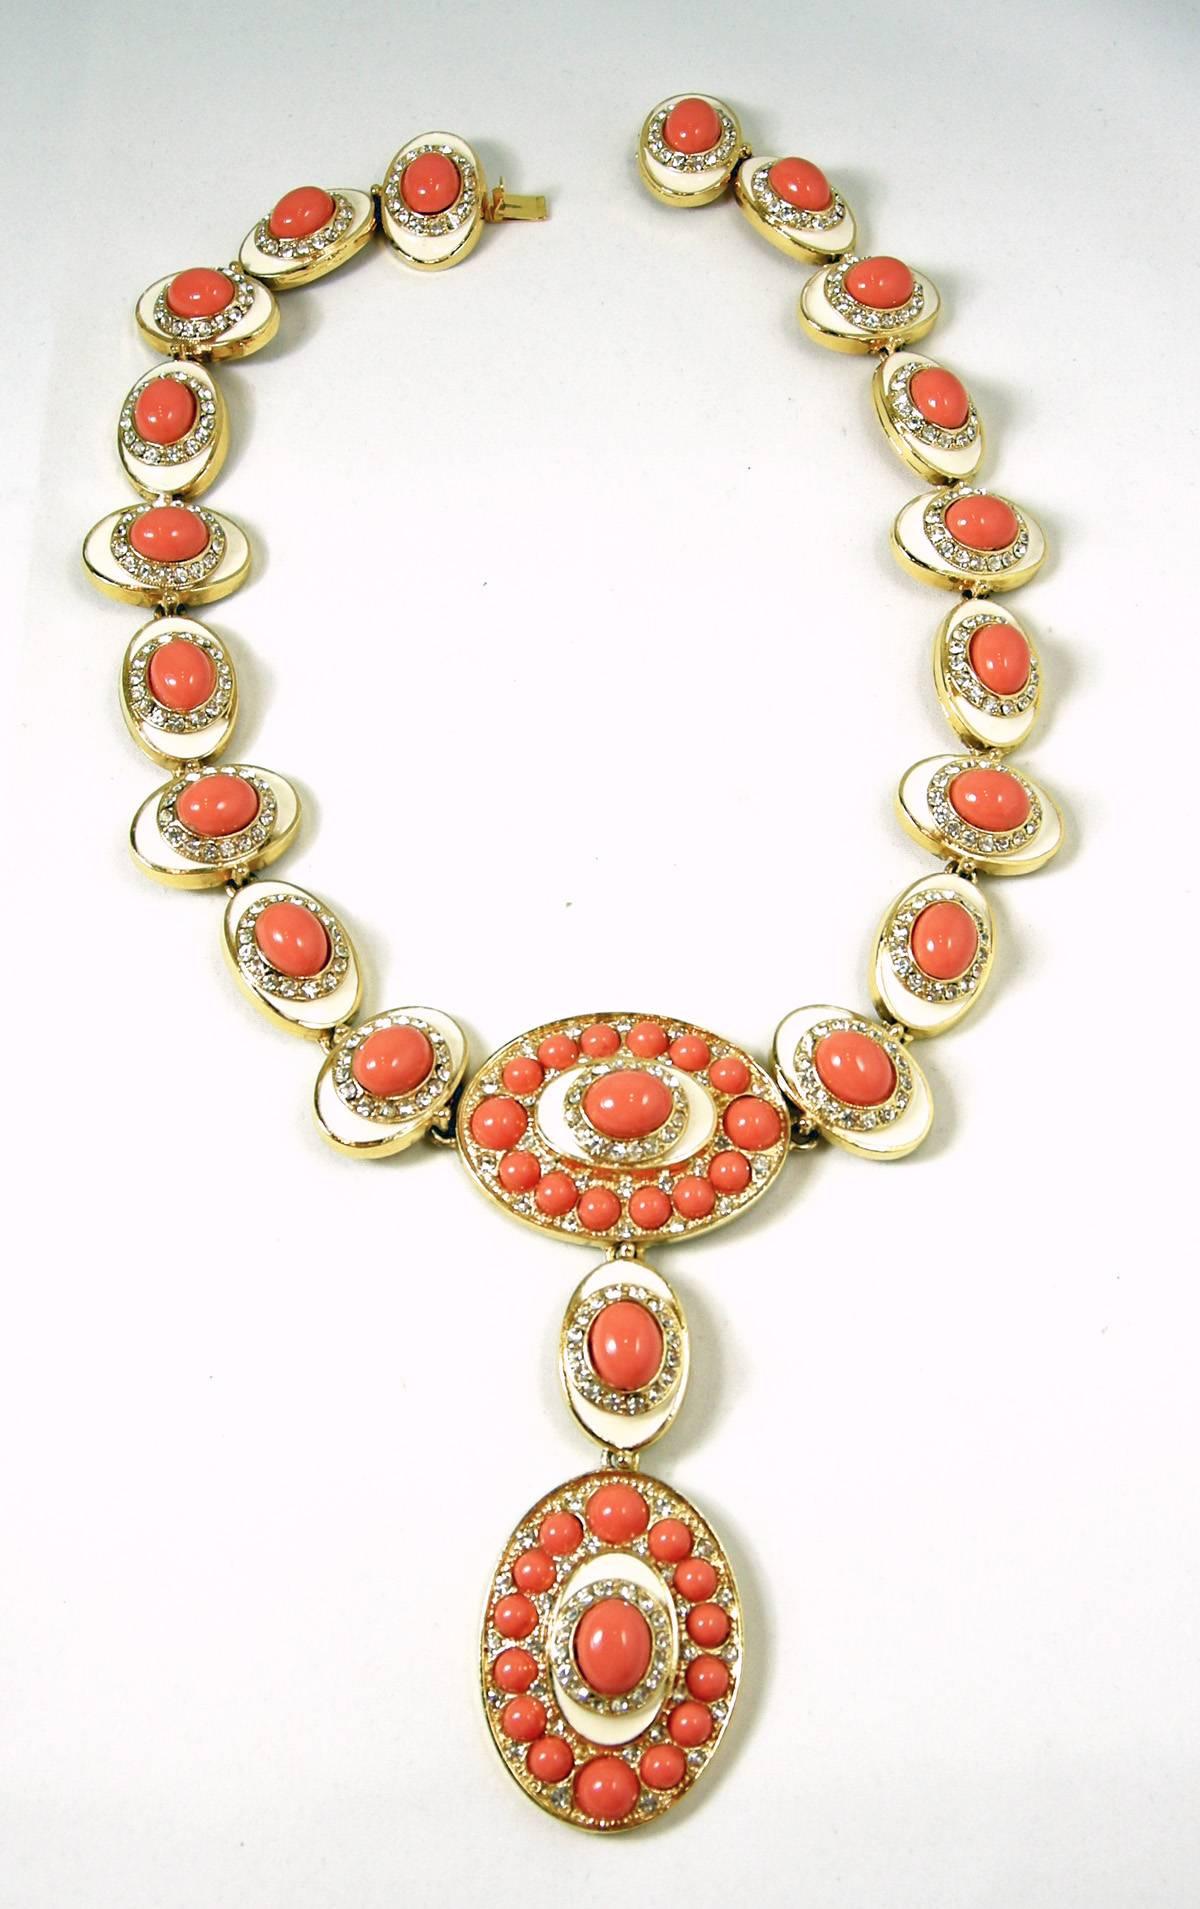 Women's SIgned Kenneth Lane Faux Coral & Rhinestone Necklace